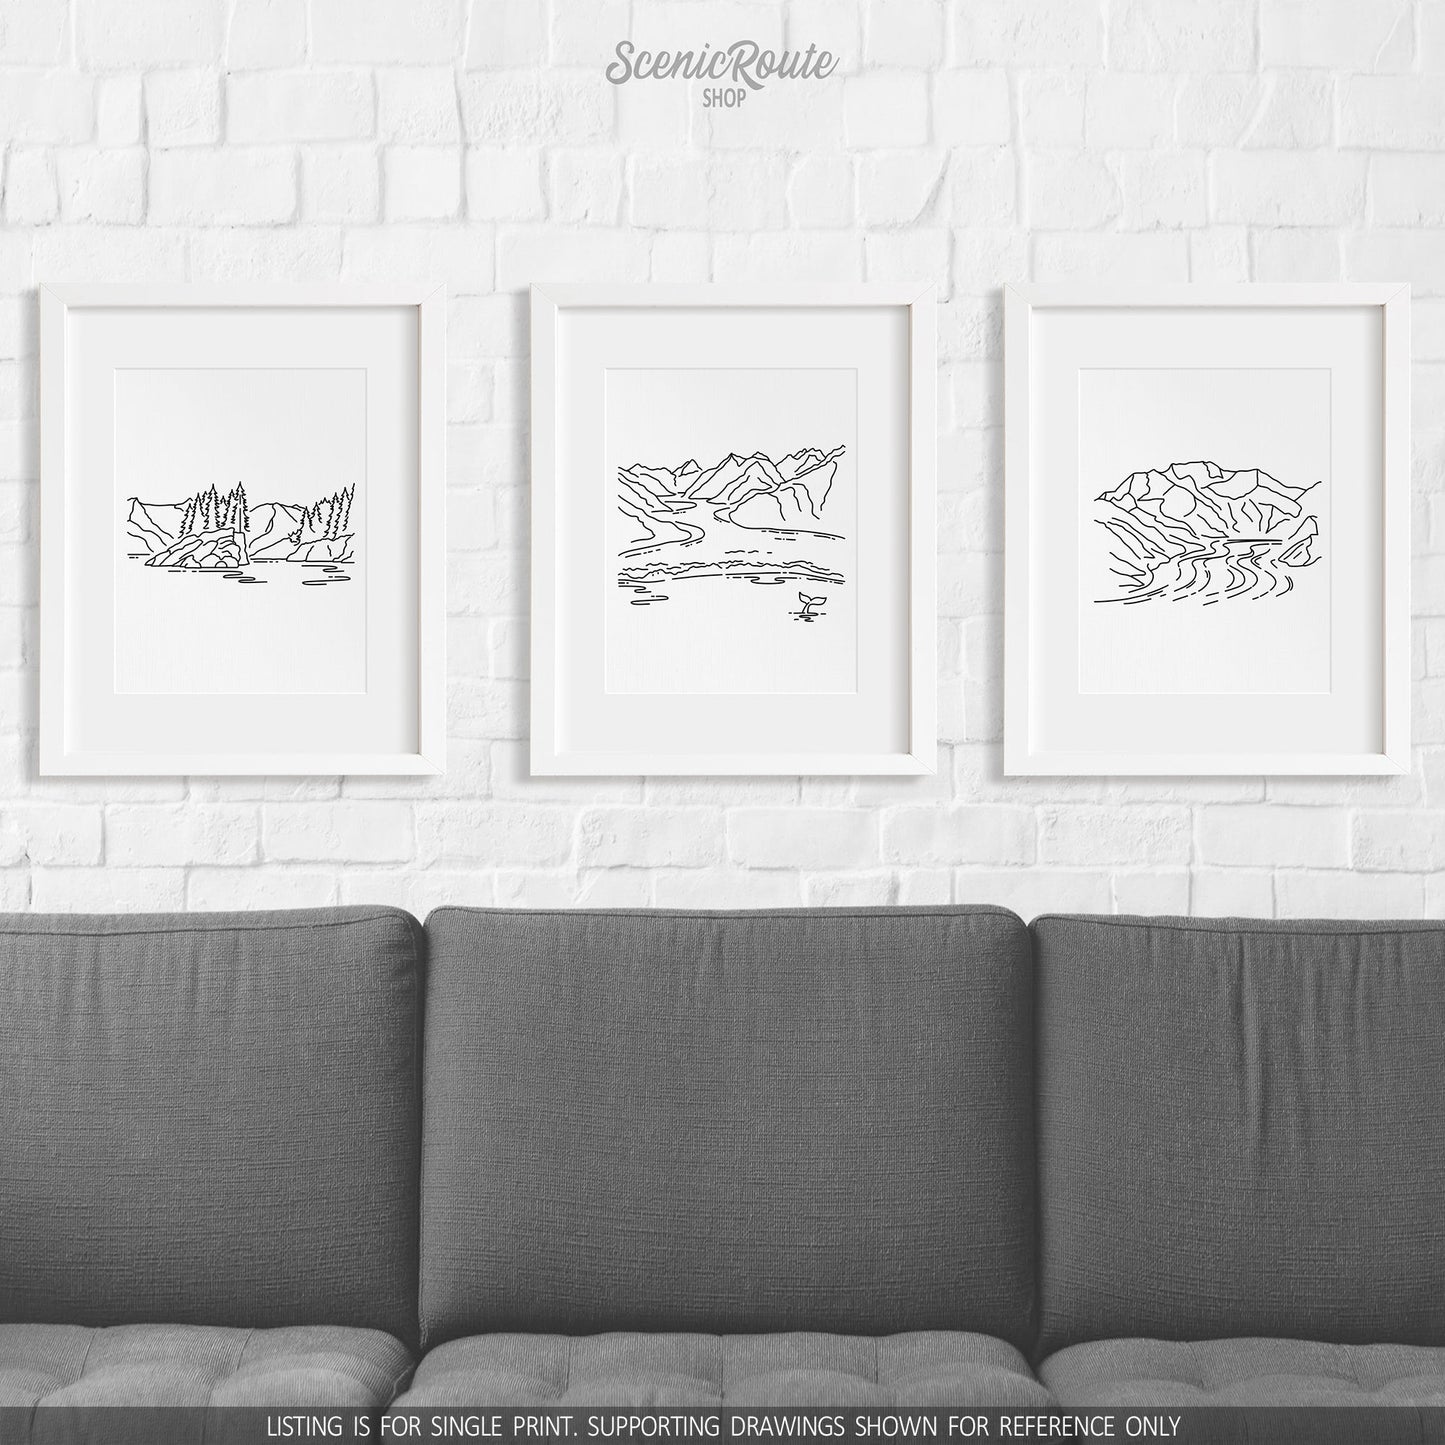 A group of three framed drawings on a wall above a couch. The line art drawings include Kenai Fjords National Park, Glacier Bay National Park, and Wrangell Saint Elias National Park